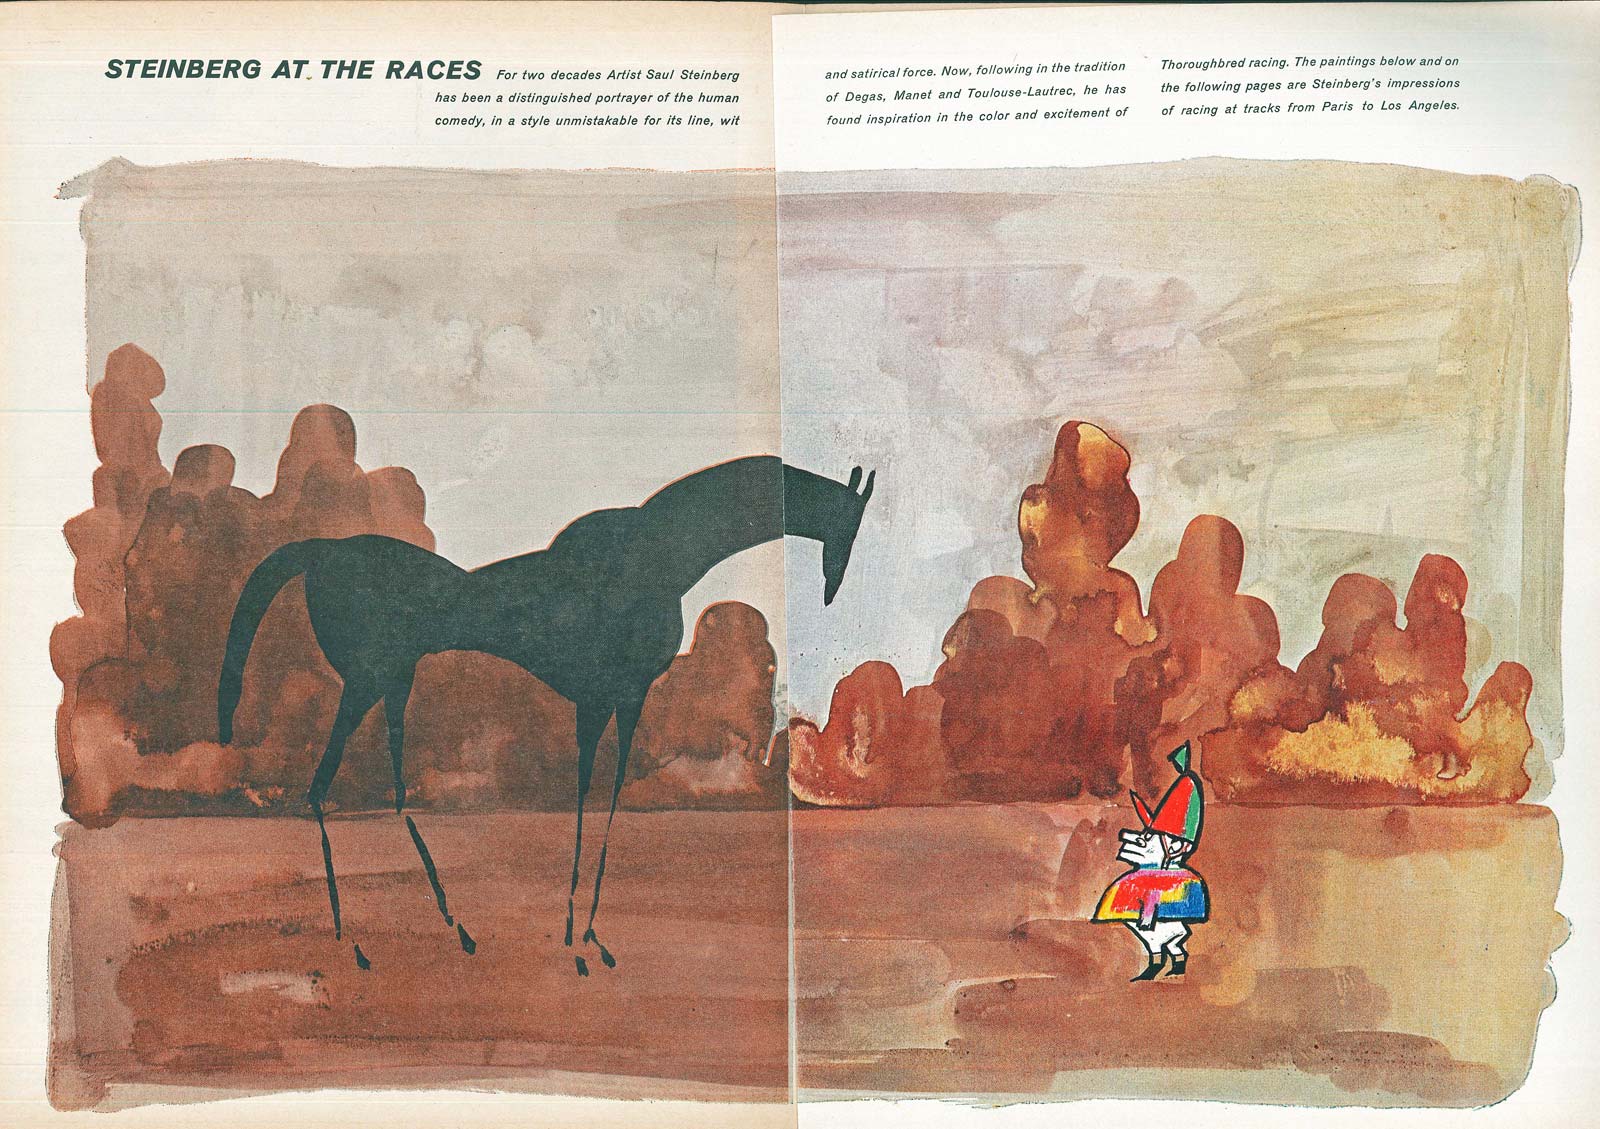 From “Steinberg at the Races.” <em>Sports Illustrated</em>, November 11, 1963.